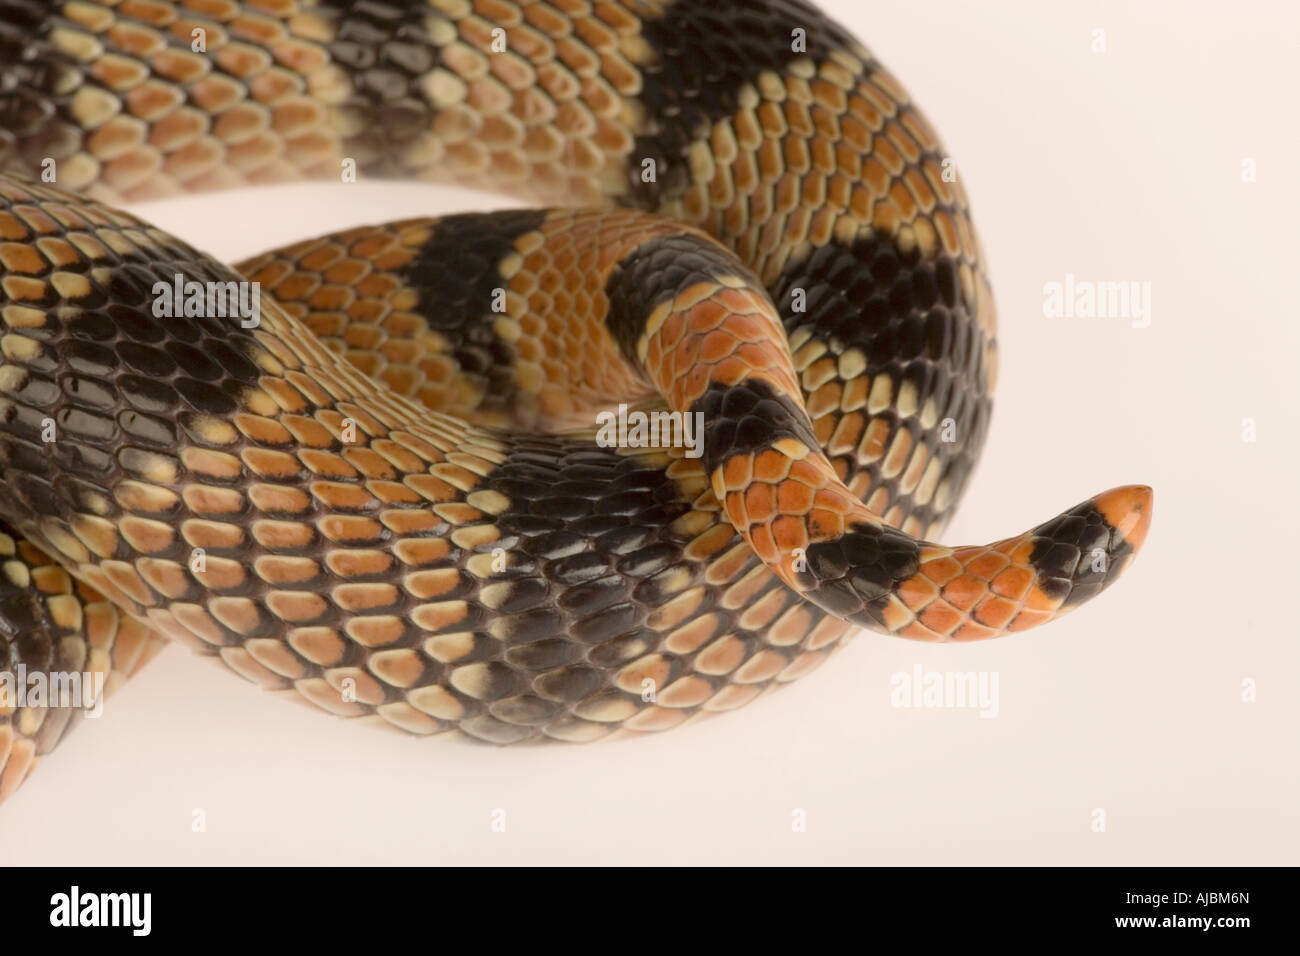 Close-up of the Coiled Body and Tail of a Cape Coral Snake (Aspidelaps lubricus lubricus) Stock Photo